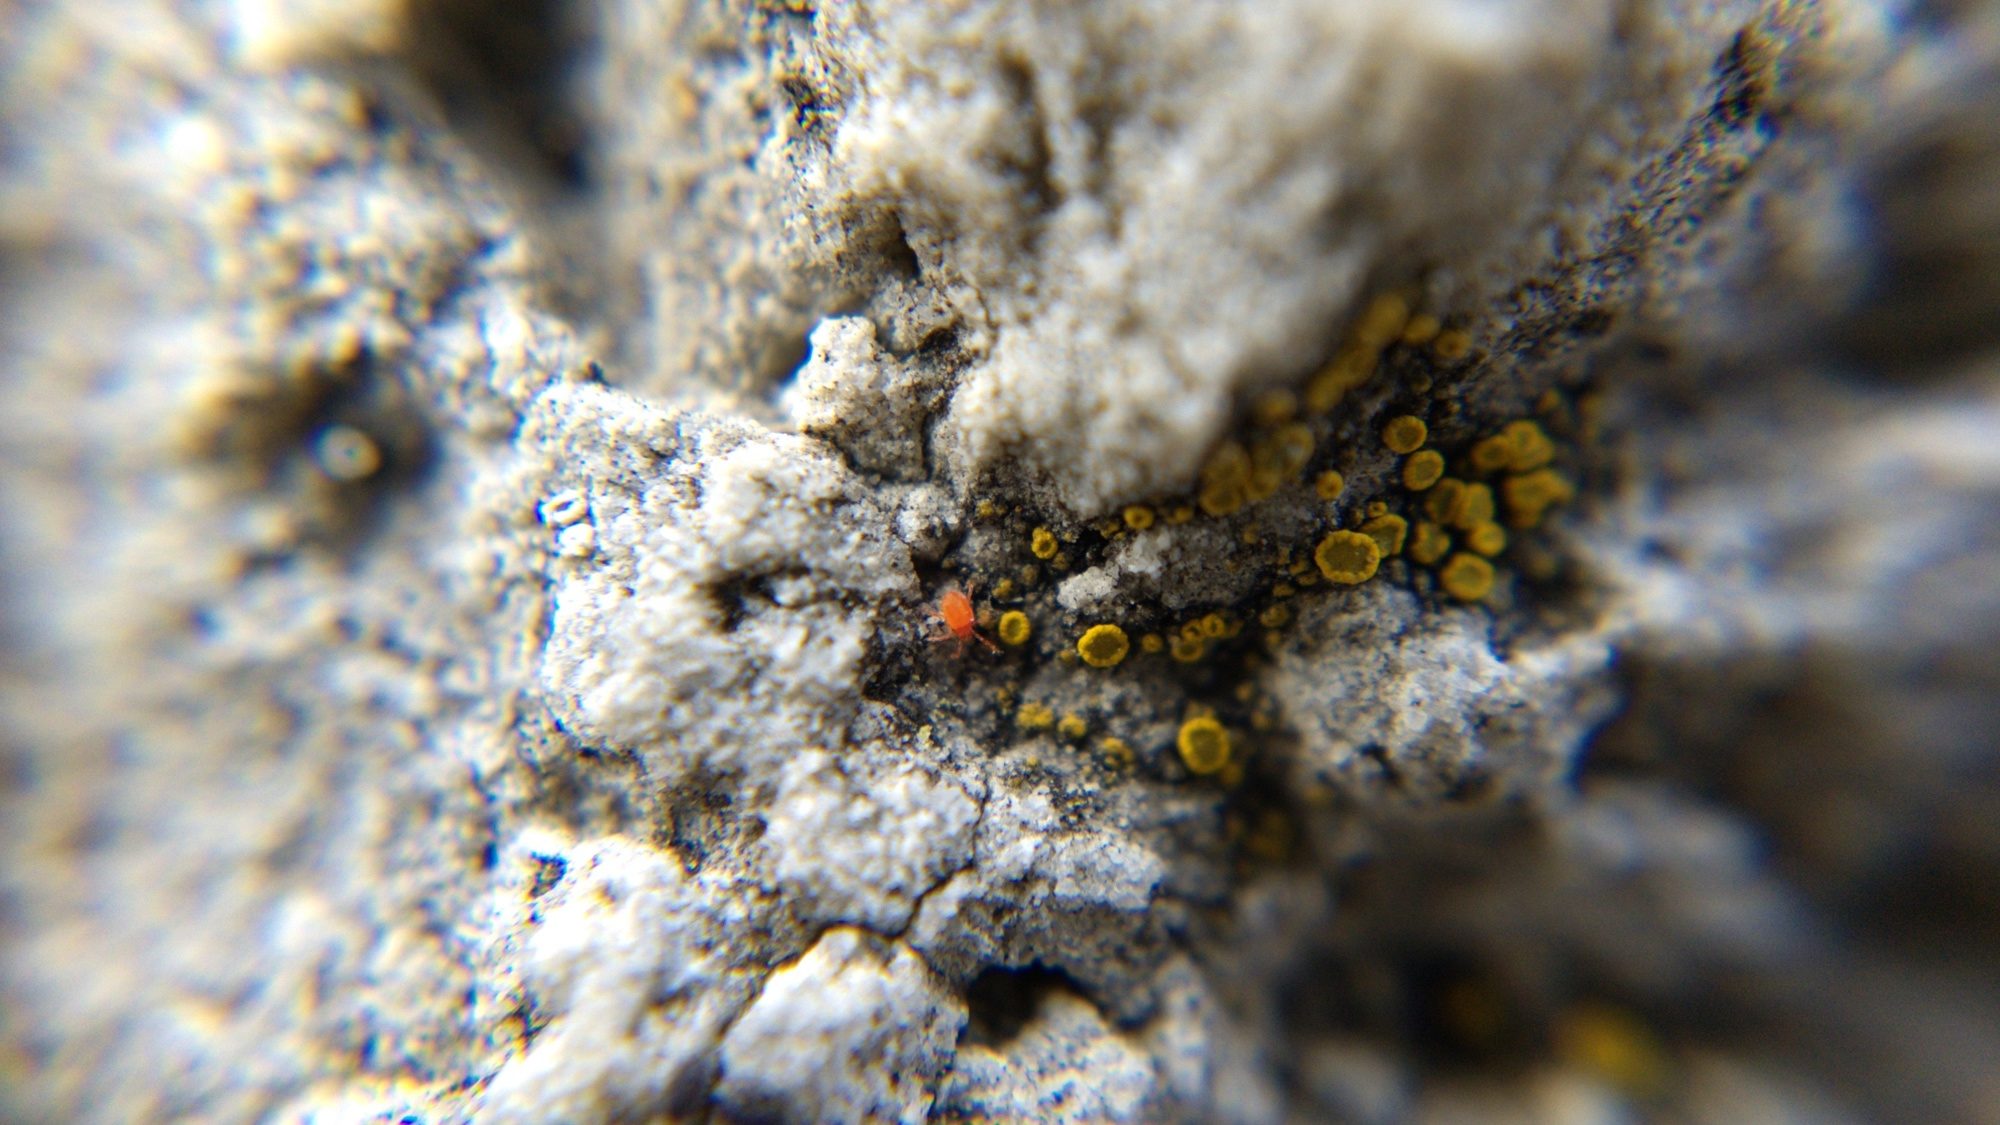 Close-up of mite on lichen-covered rock